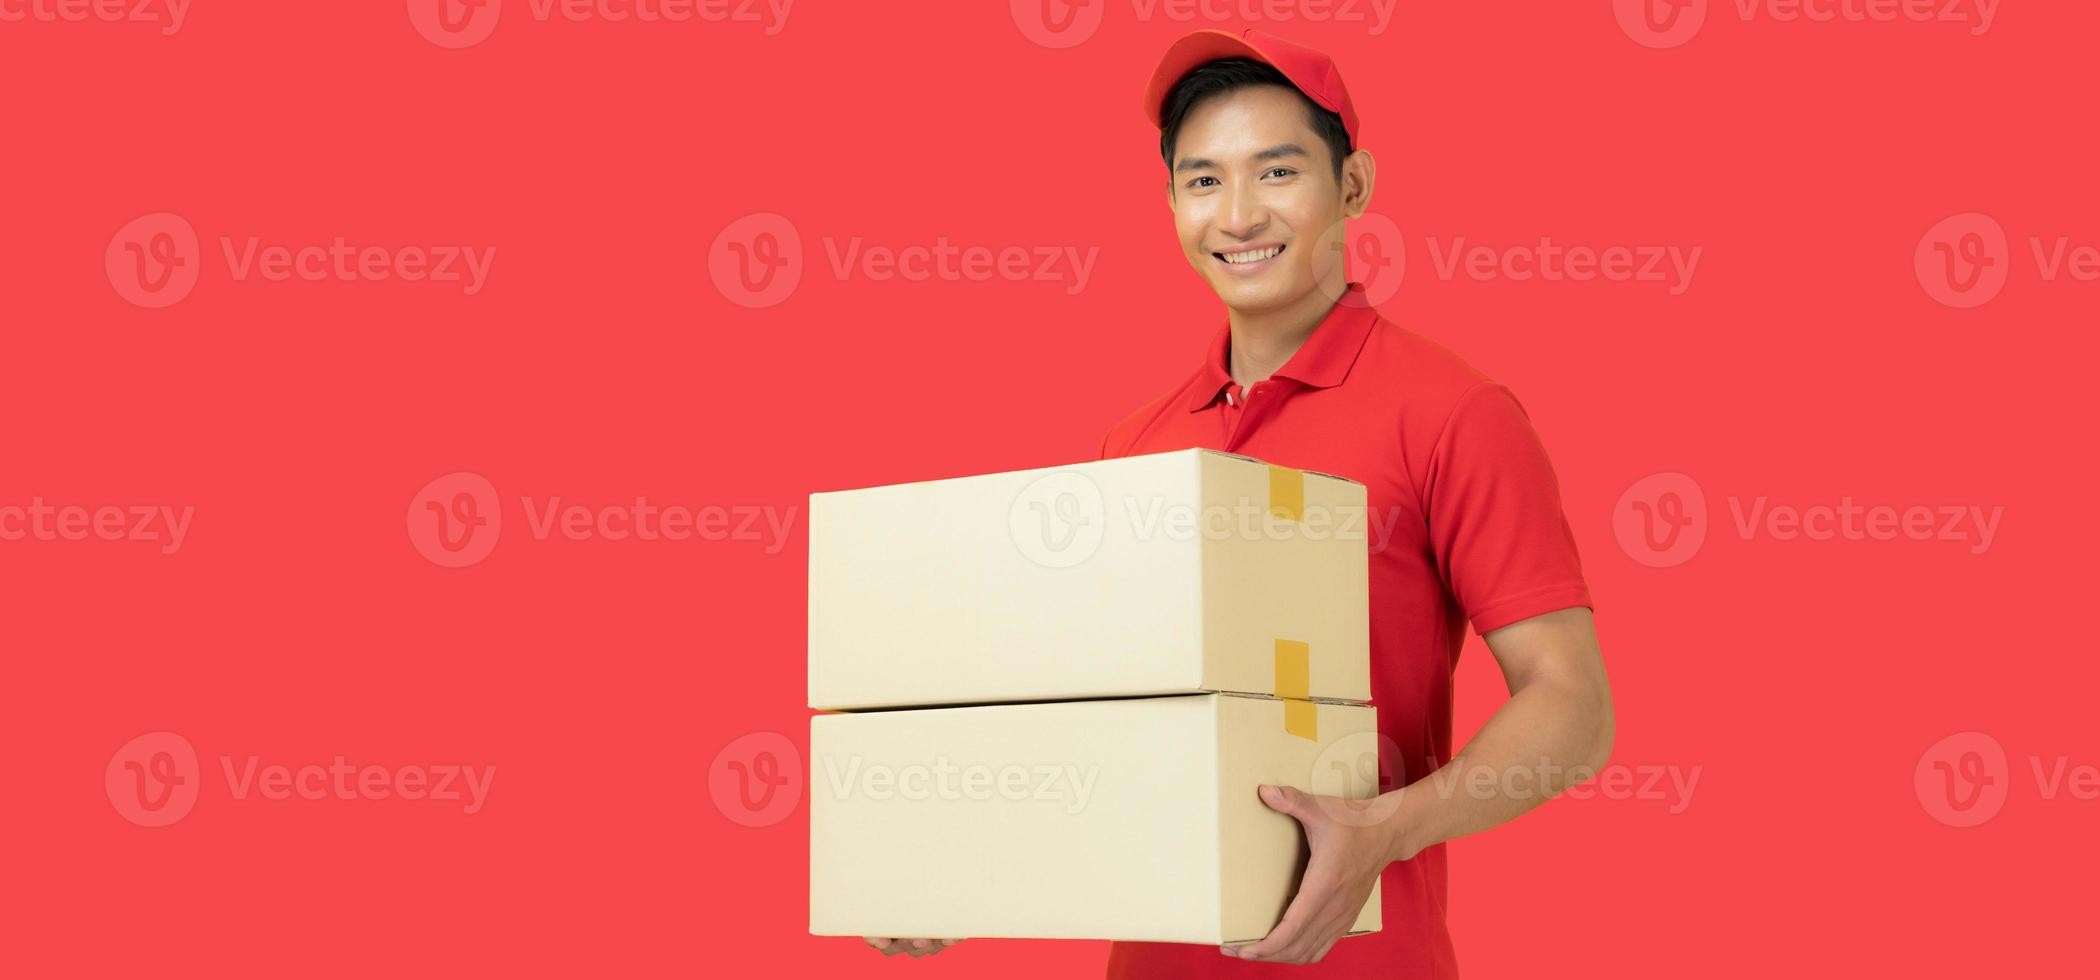 The smiling delivery man is dressed in a red cap and blank t-shirt uniform, and is standing in front of a red background photo